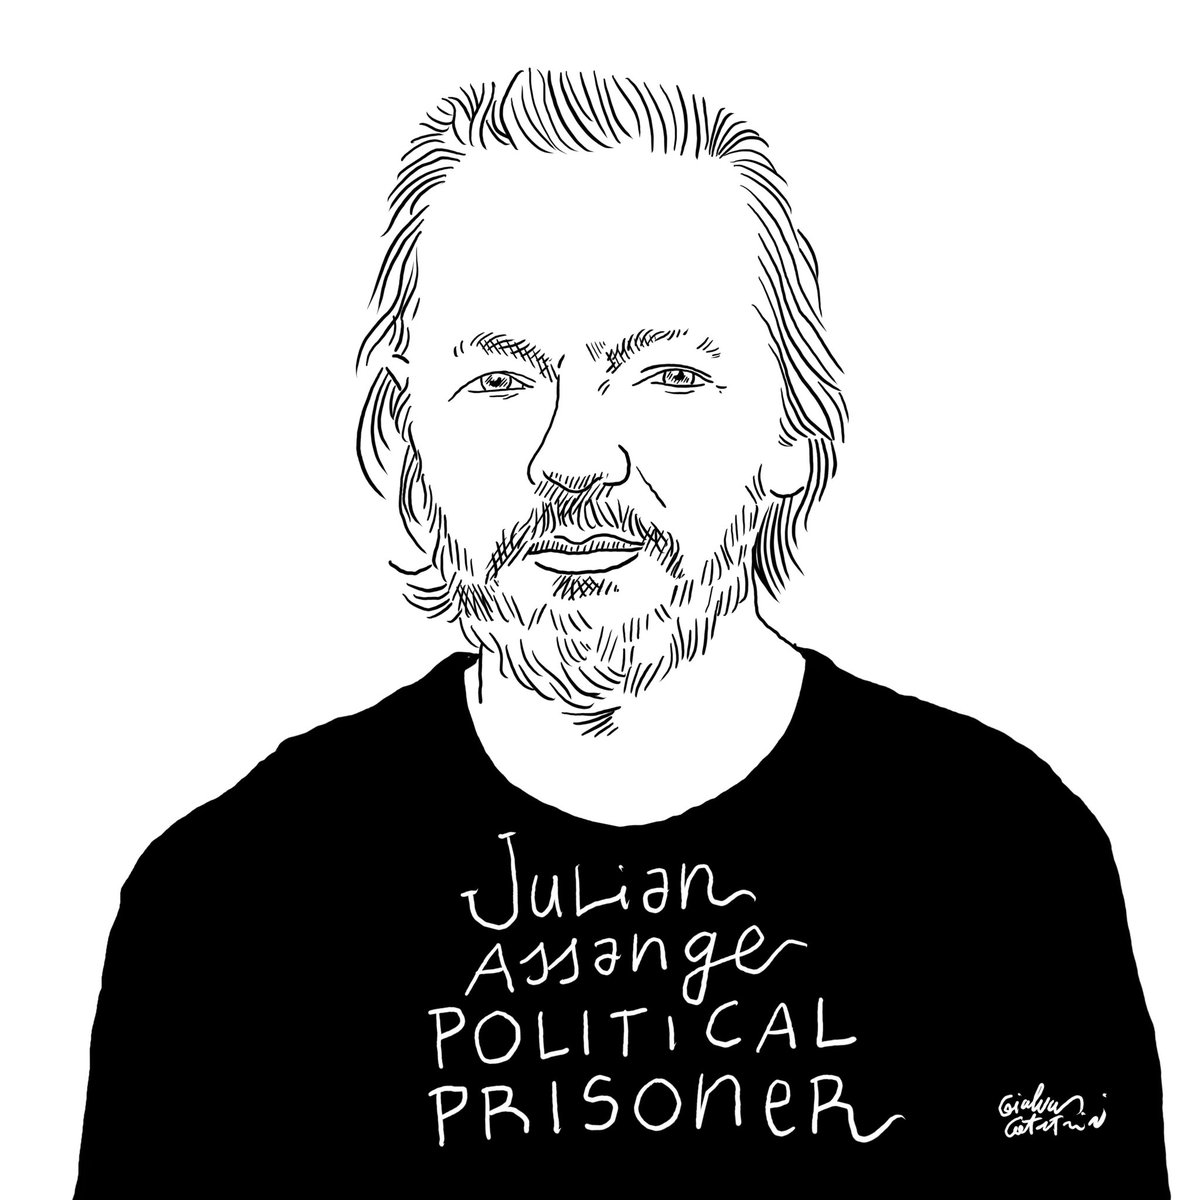 Amnesty: 'Julian Assange’s five-year imprisonment in the UK is unacceptable' “Julian Assange dared to bring to light revelations of alleged war crimes committed by the USA. It is unacceptable that years of his life have been stolen' #FreeAssangeNOW @amnesty @wikileaks